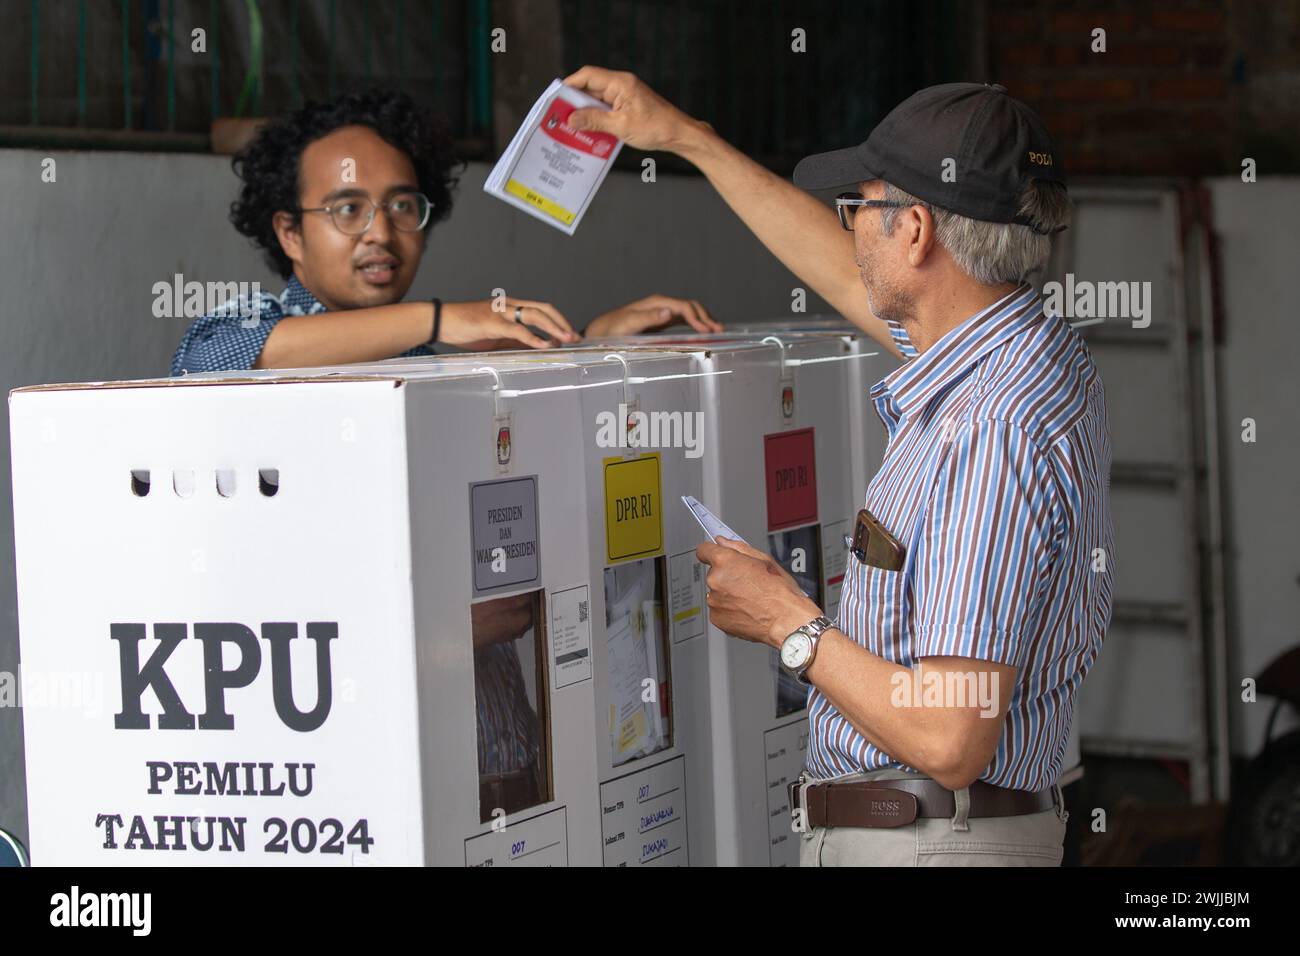 Bandung, Indonesia - February 14, 2024: People seen participating in General Election in Indonesia. Stock Photo